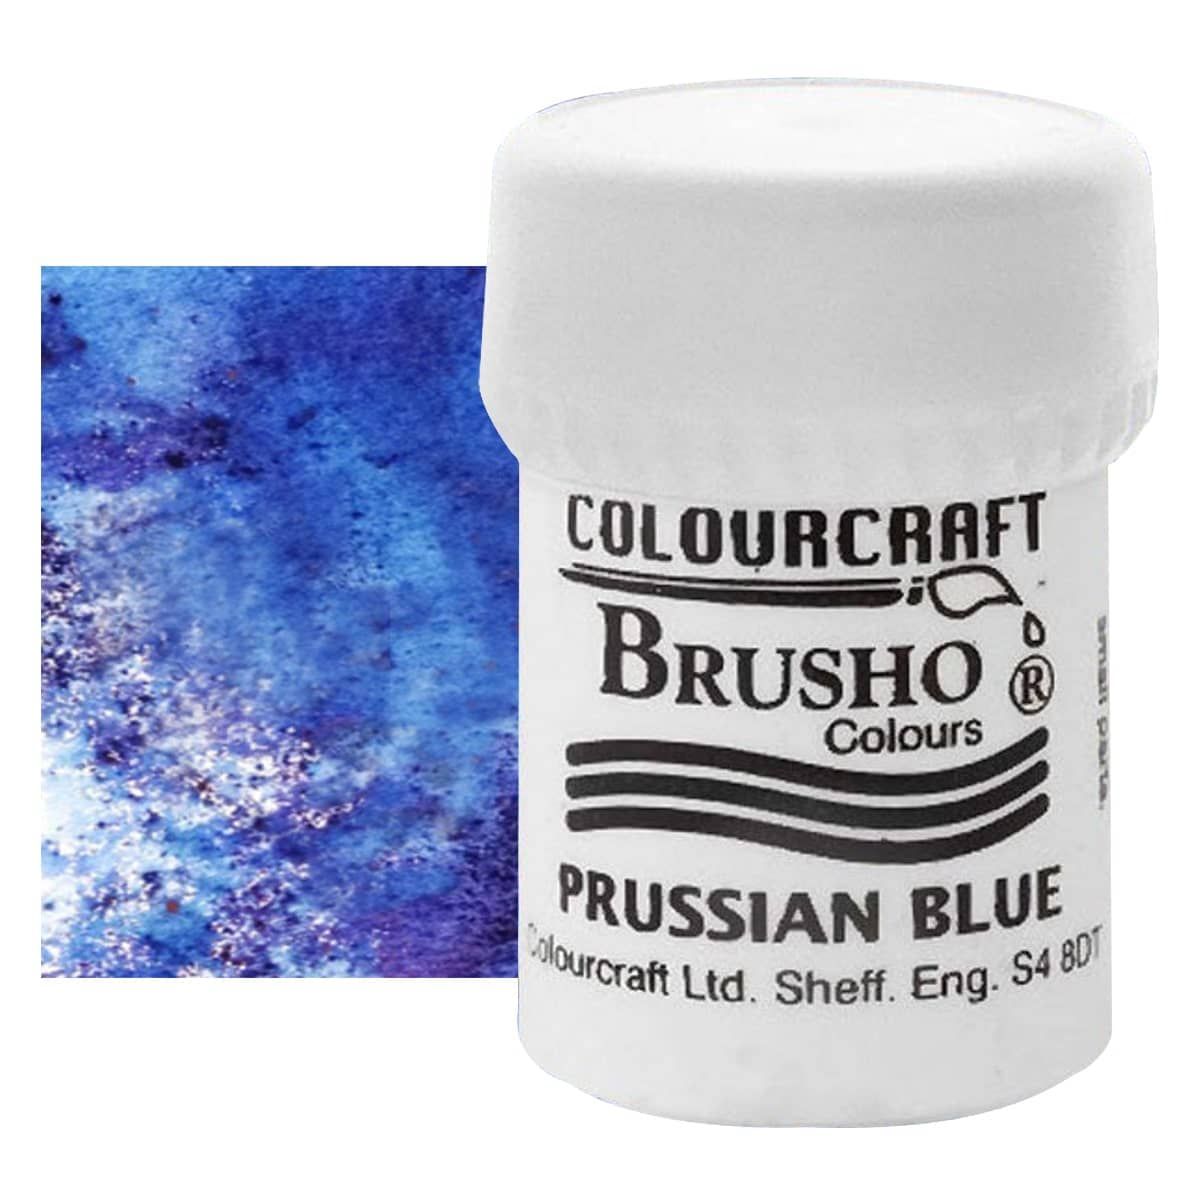 Brusho Crystal Colour, Prussian Blue, 15 grams